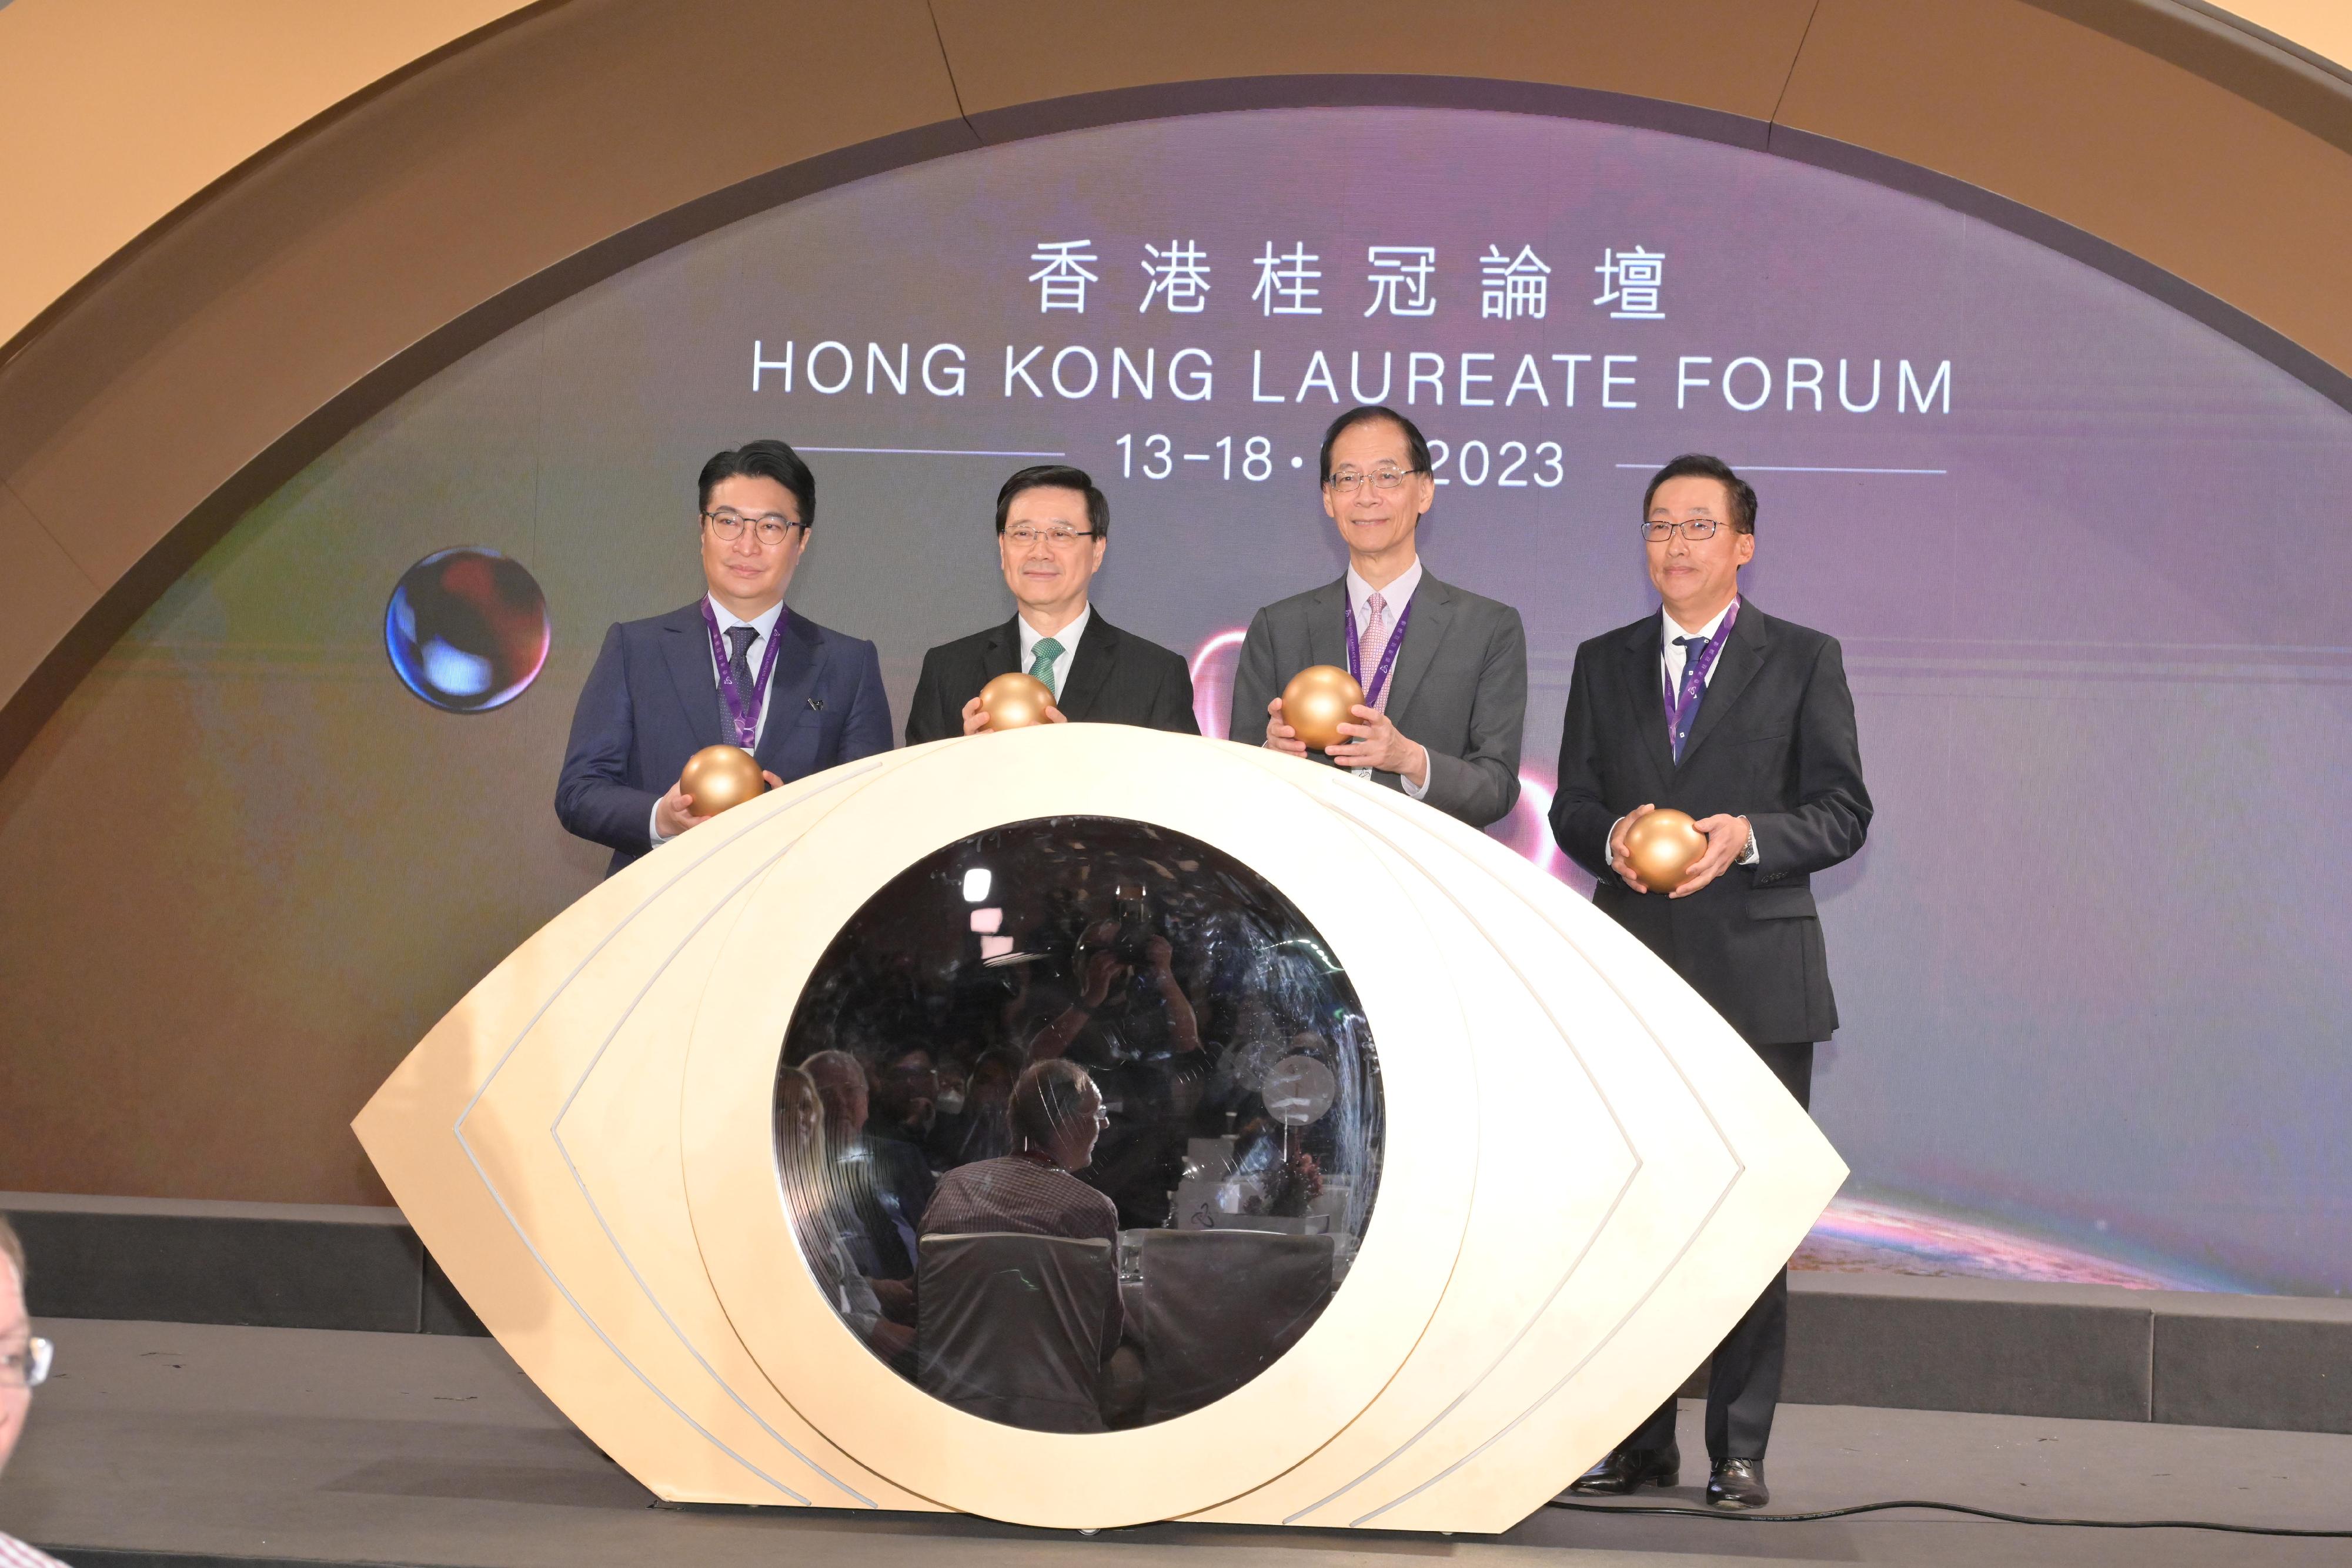 The Chief Executive, Mr John Lee, attended the Hong Kong Laureate Forum today (November 13). Photo shows (from left) the Director of the Lee Shau Kee Foundation, Dr Martin Lee; Mr Lee; the Chairman of the Council of the Hong Kong Laureate Forum, Professor Timothy W Tong; and Board Member of the Council of the Hong Kong Laureate Forum Dr Raymond Chan, officiating at the forum.